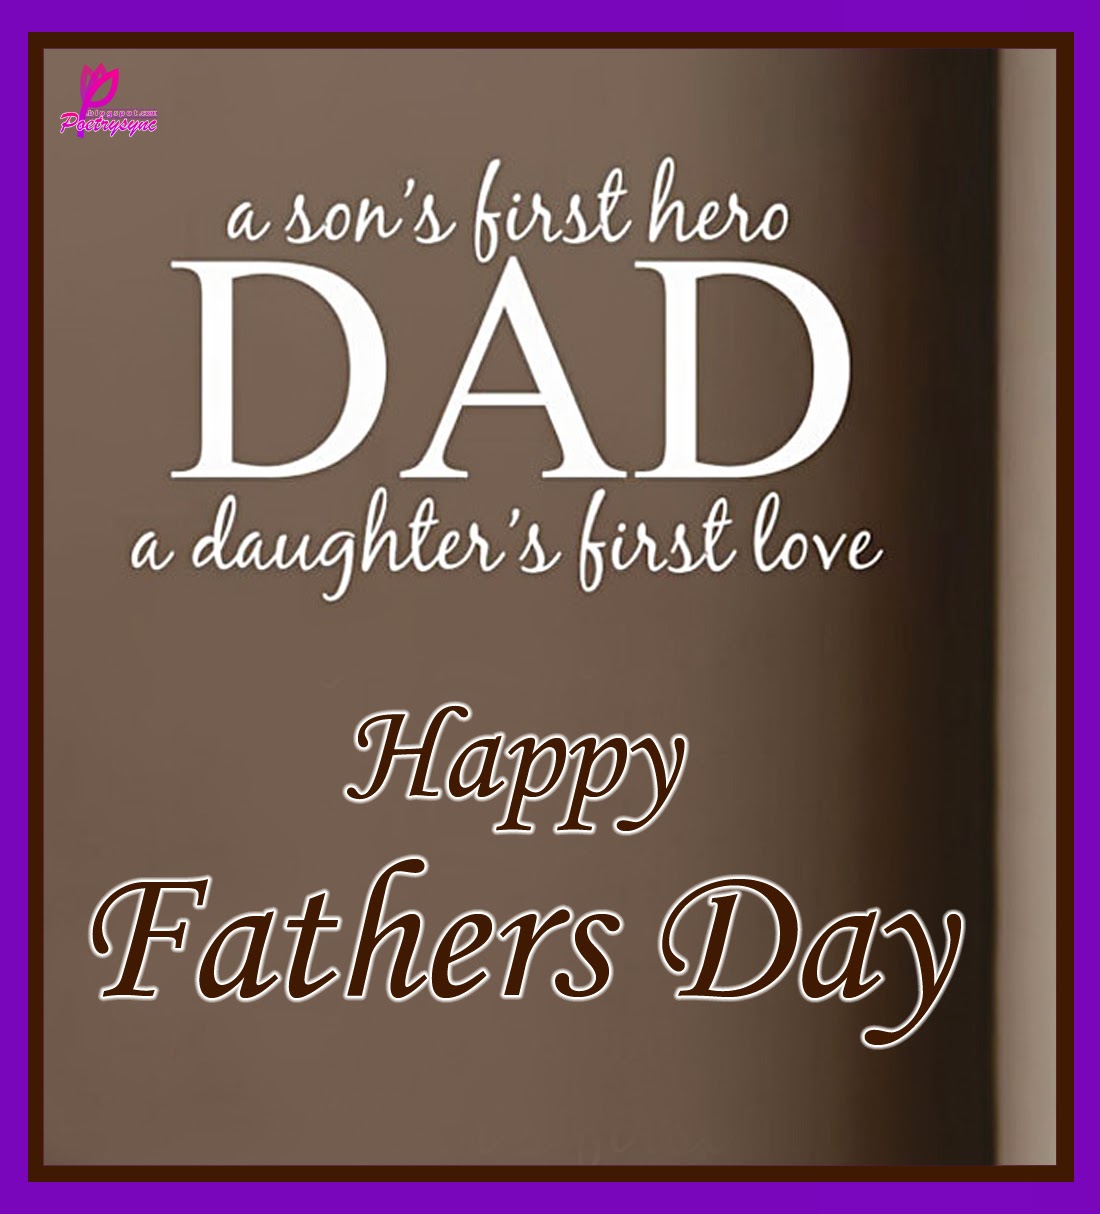 Happy Fathers Day Quotes. QuotesGram